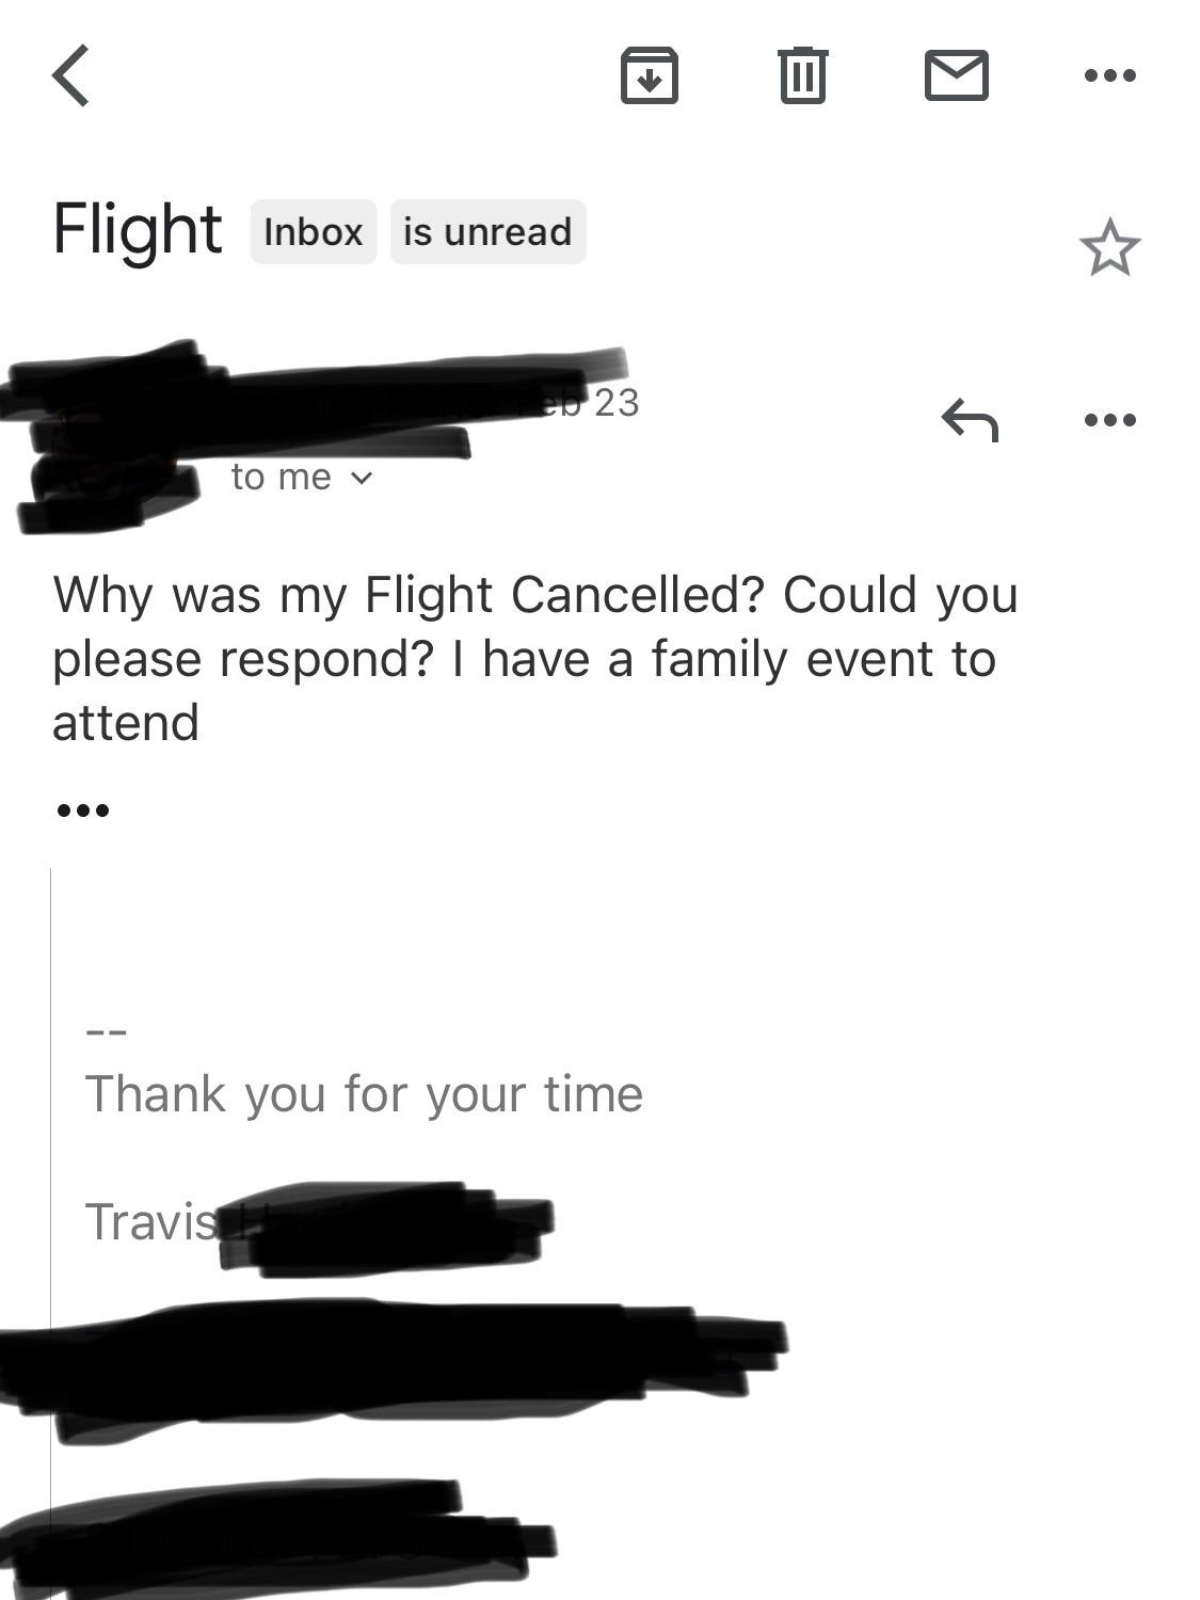 An alleged fraudster had his flight cancelled.